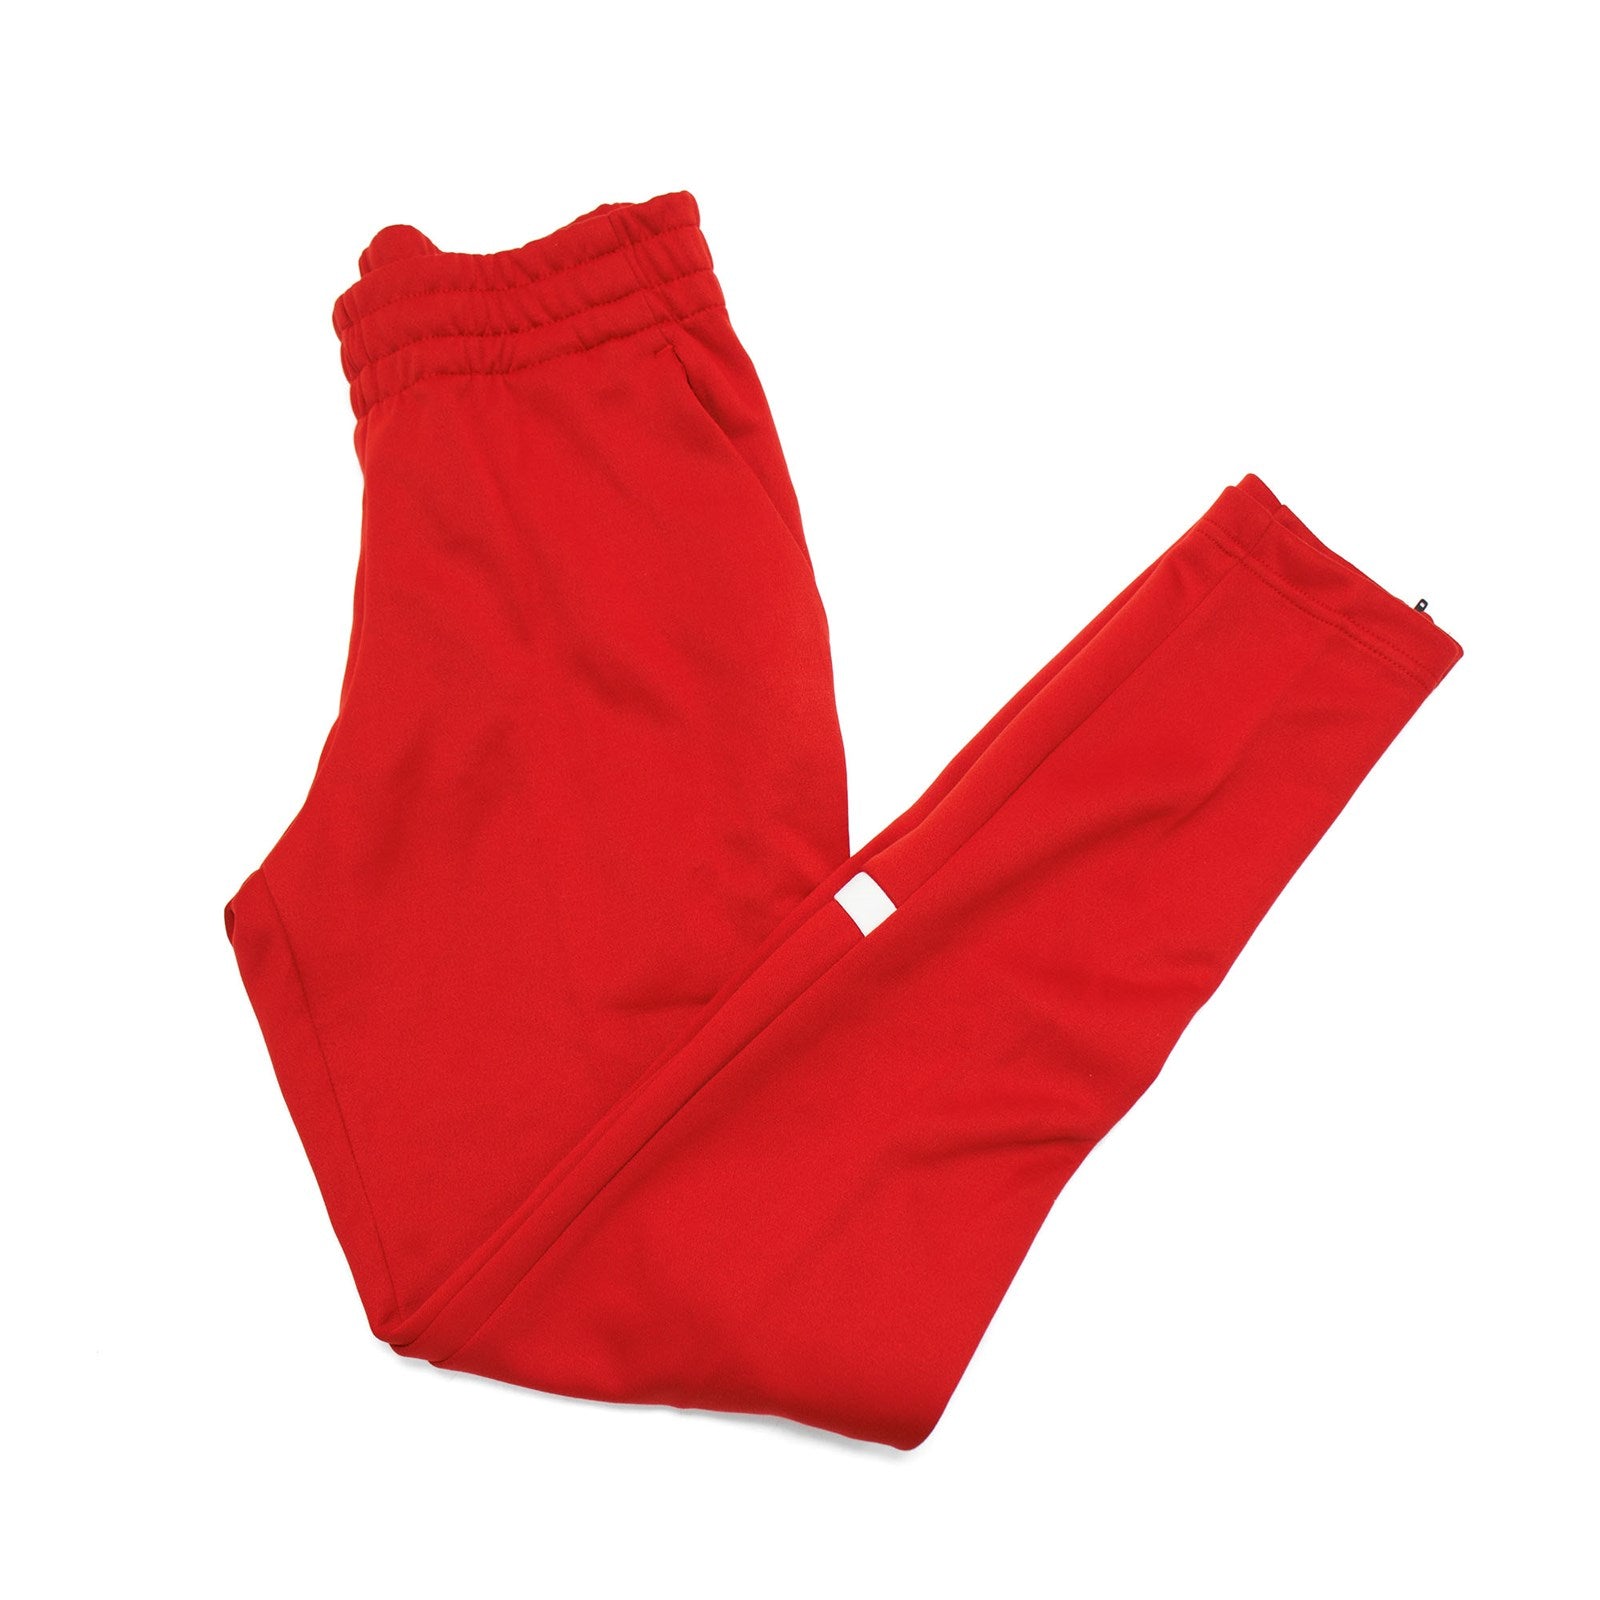 Adidas Women Under The Lights Warmup Pant